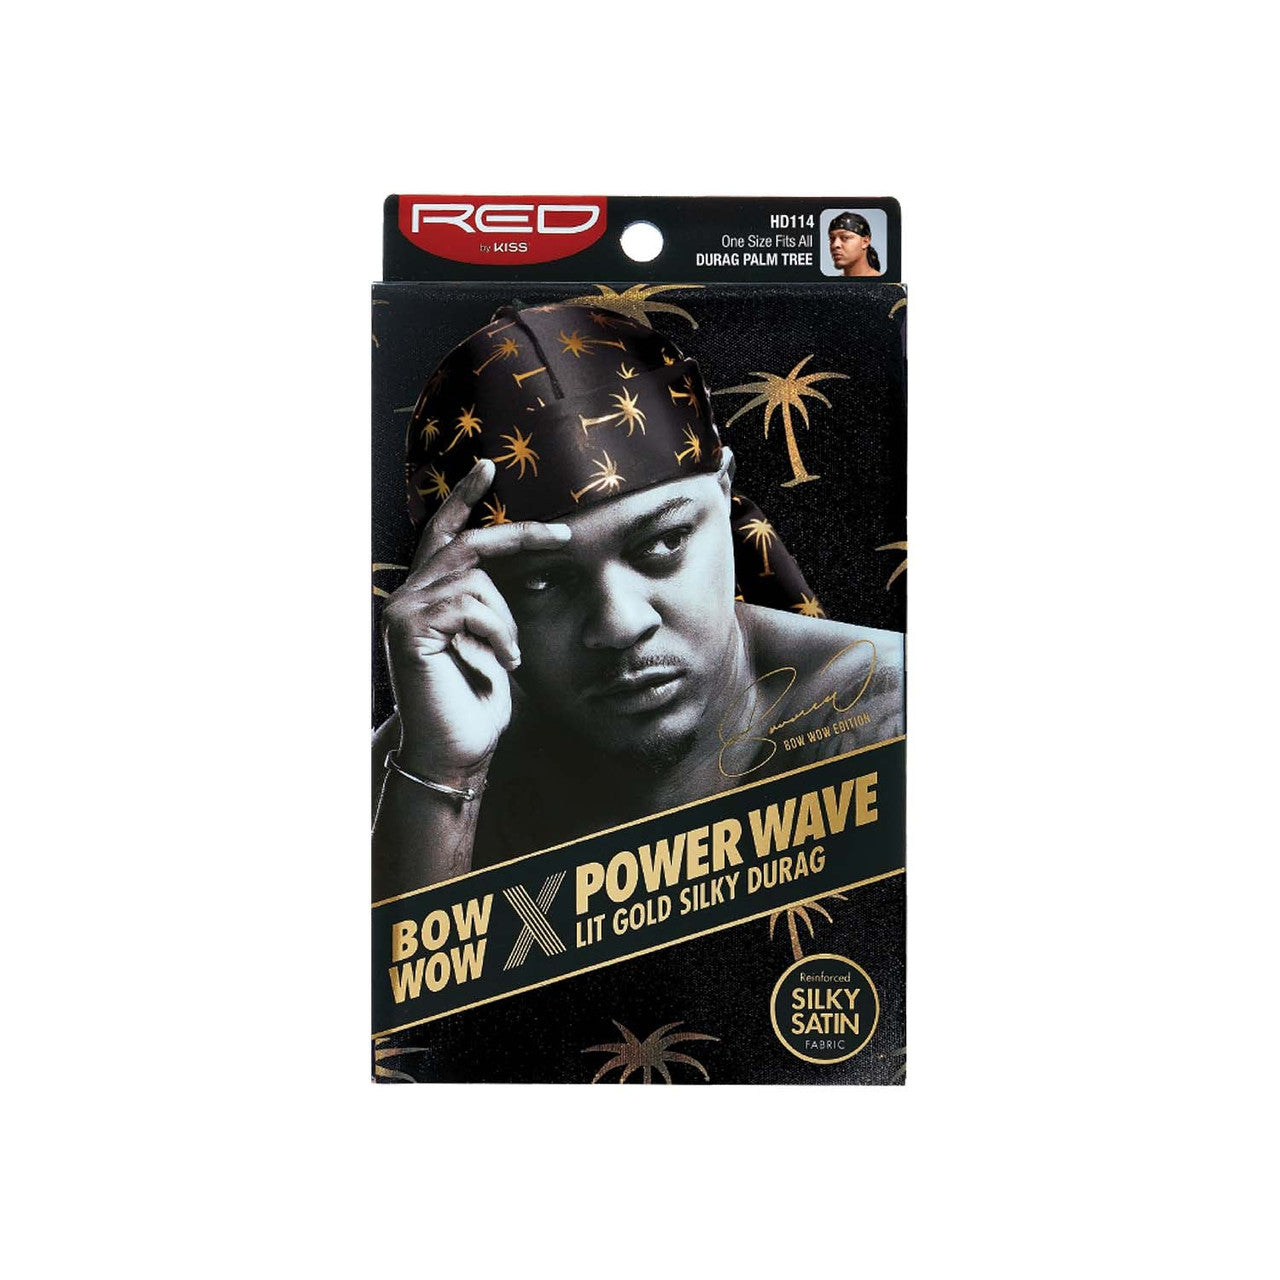 Red by Kiss Bow Wow X Power Wave Lit Gold Silky Durag - Durag Palm Tree - #HD114